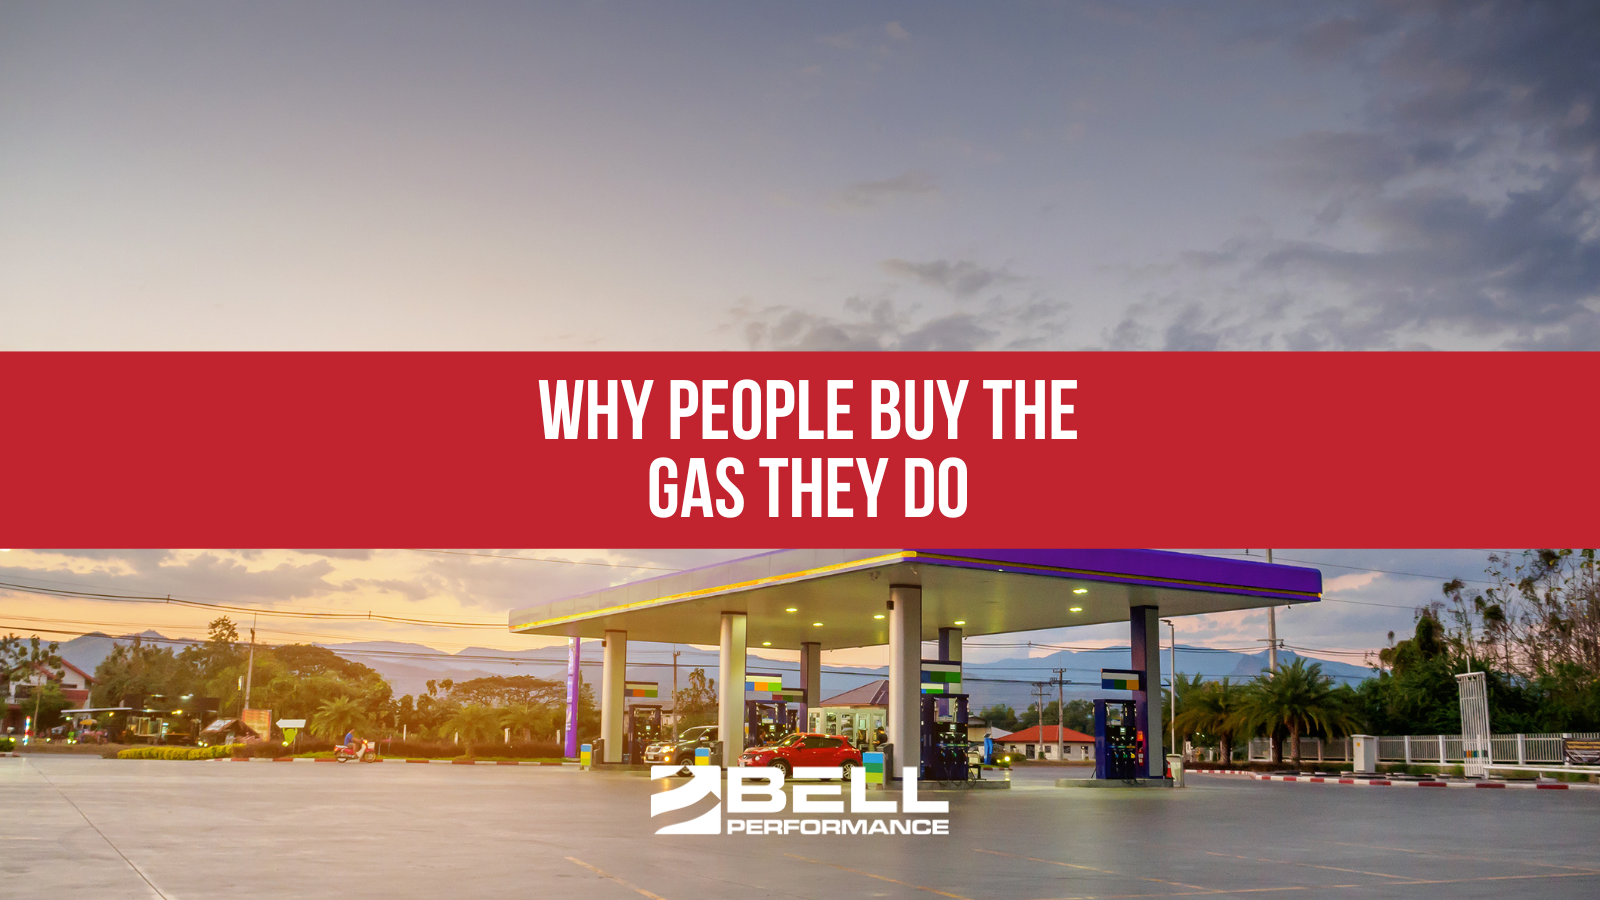 Why people buy the gas they do